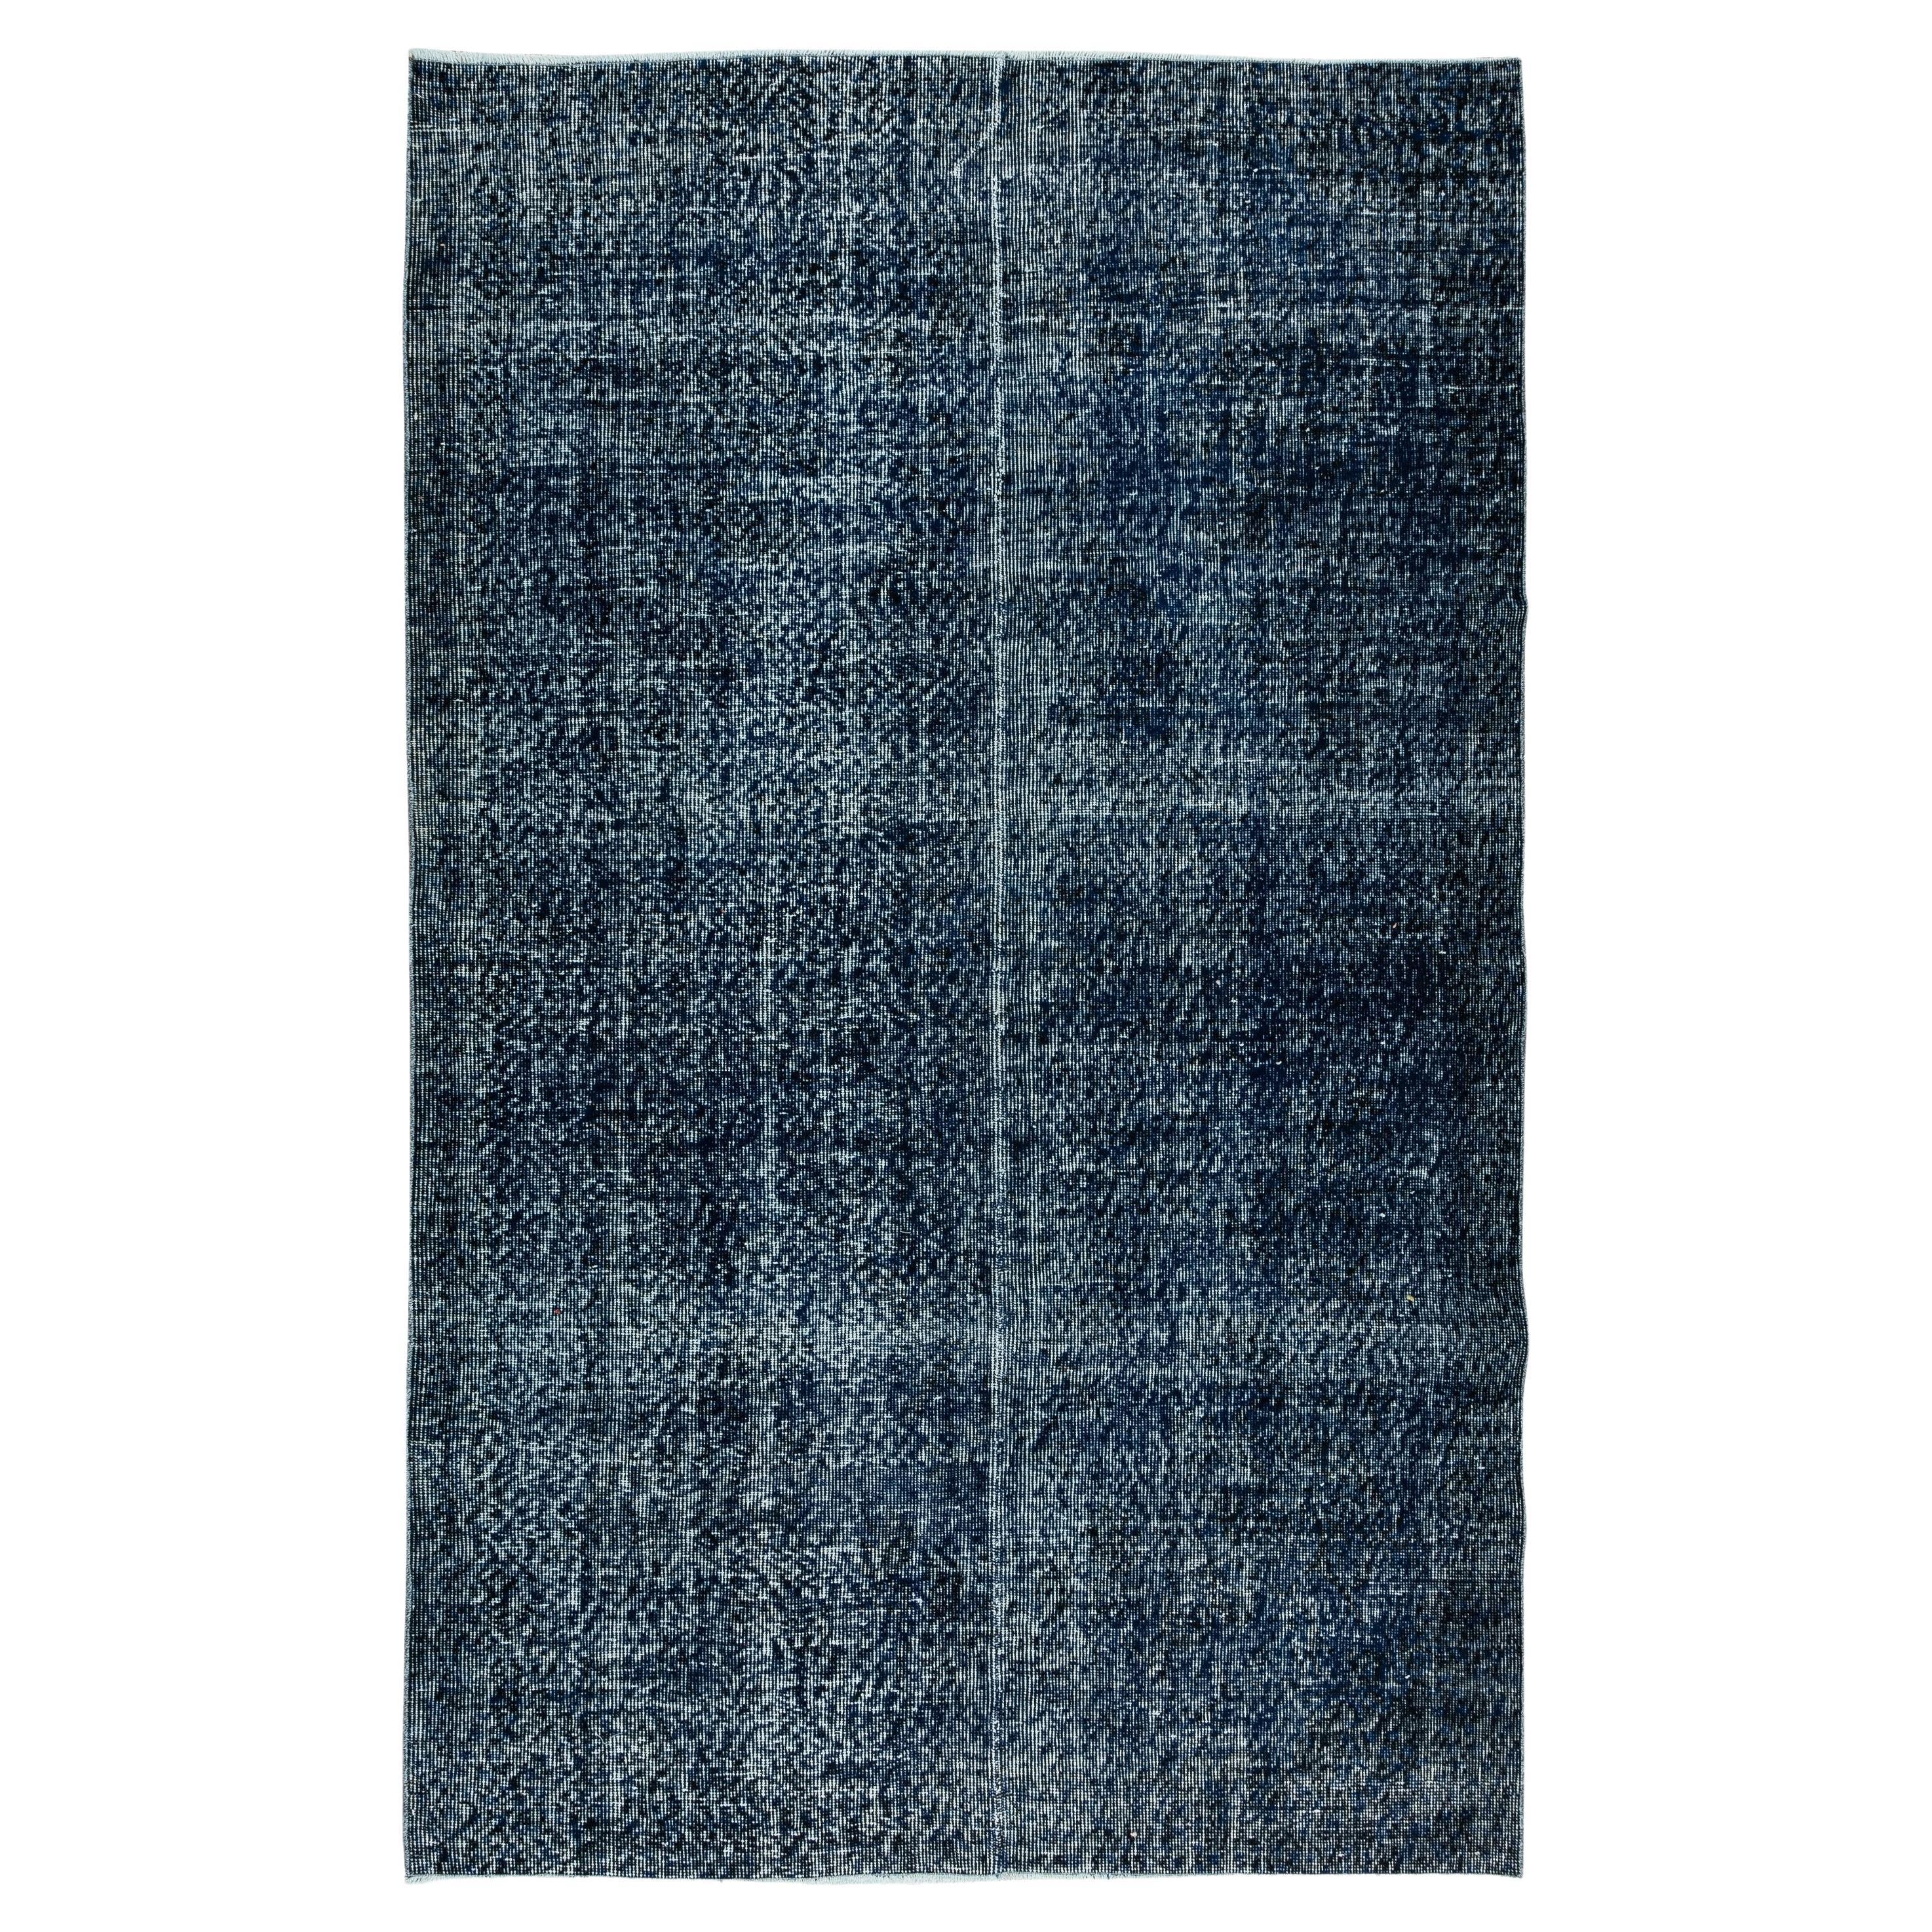 5.2x8.3 Ft Turkish Vintage Carpet Over-Dyed in Navy Blue, Modern HandKnotted Rug